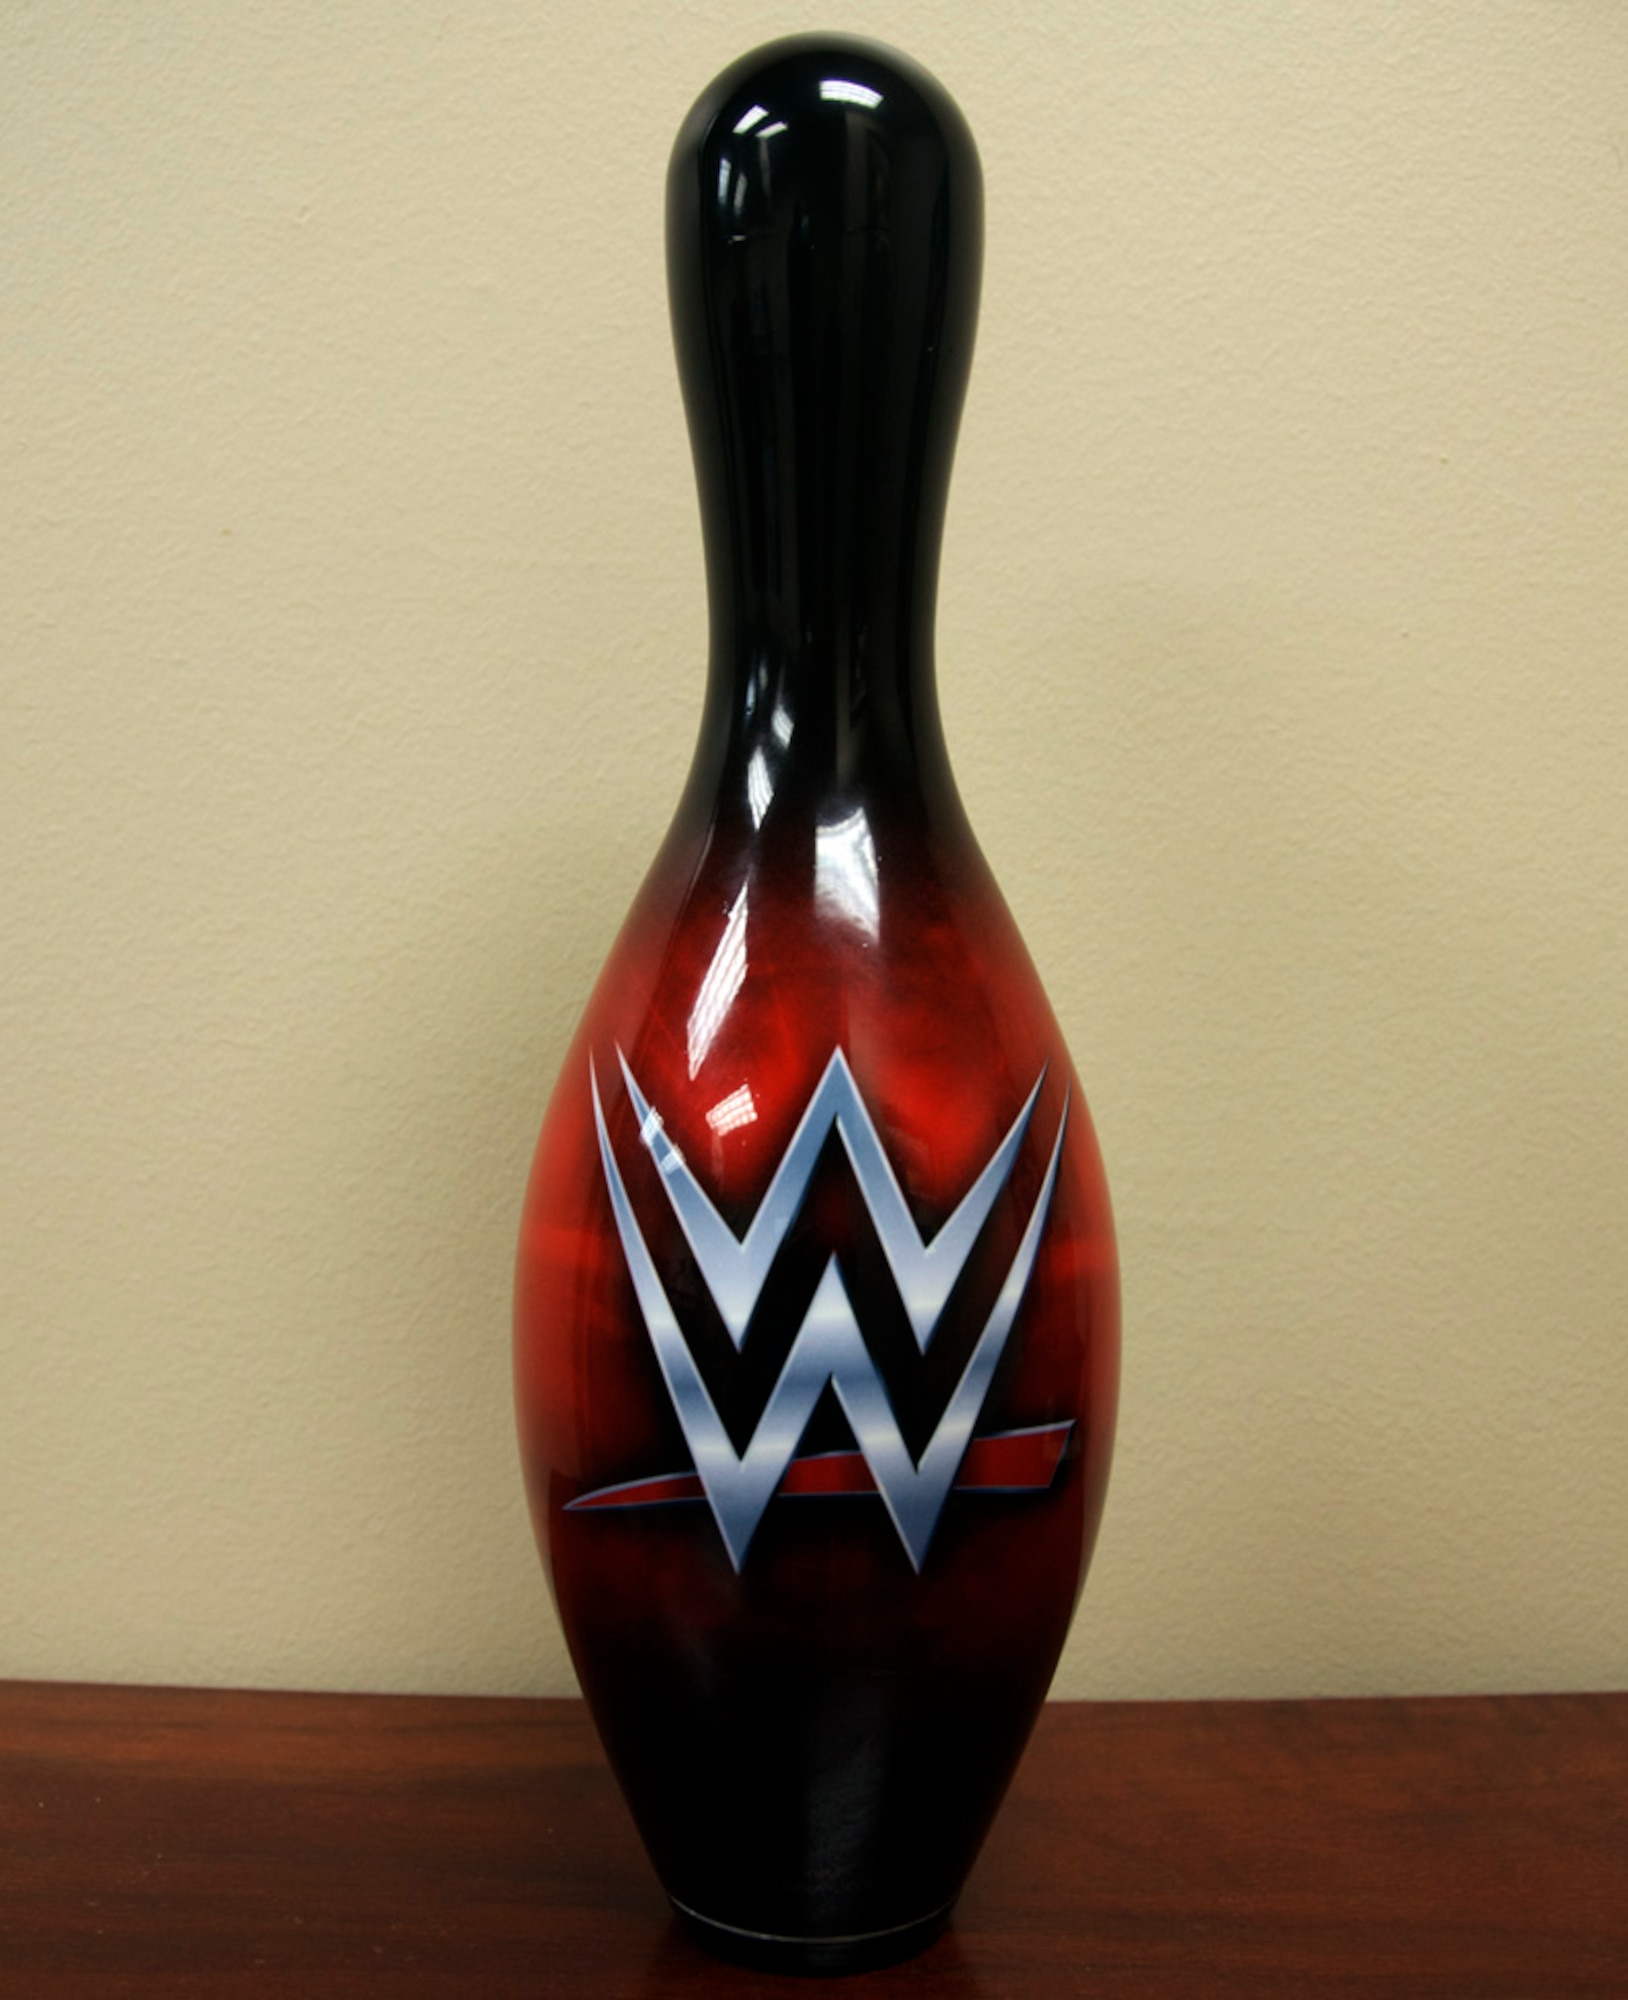 Airmen who participate in the Air Force Services Activity’s WWE Summer Bowling League will receive a licensed WWE pin or bowling ball. 